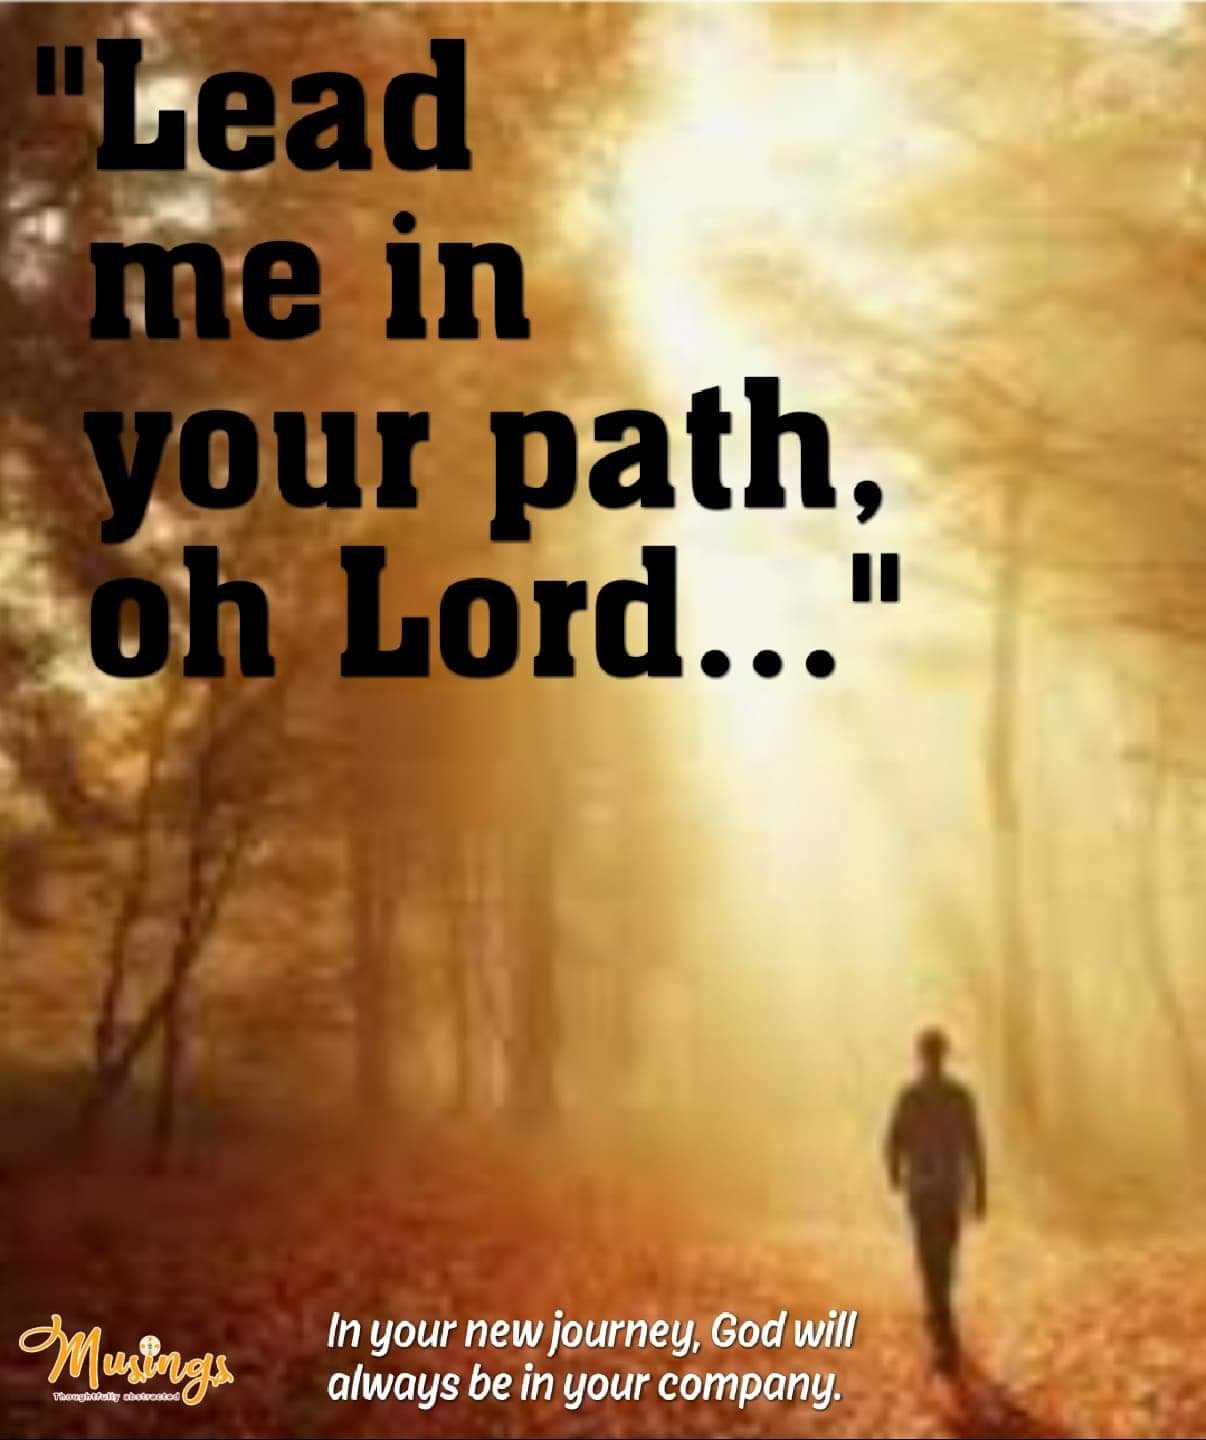 "Lead me in your path, oh Lord..."